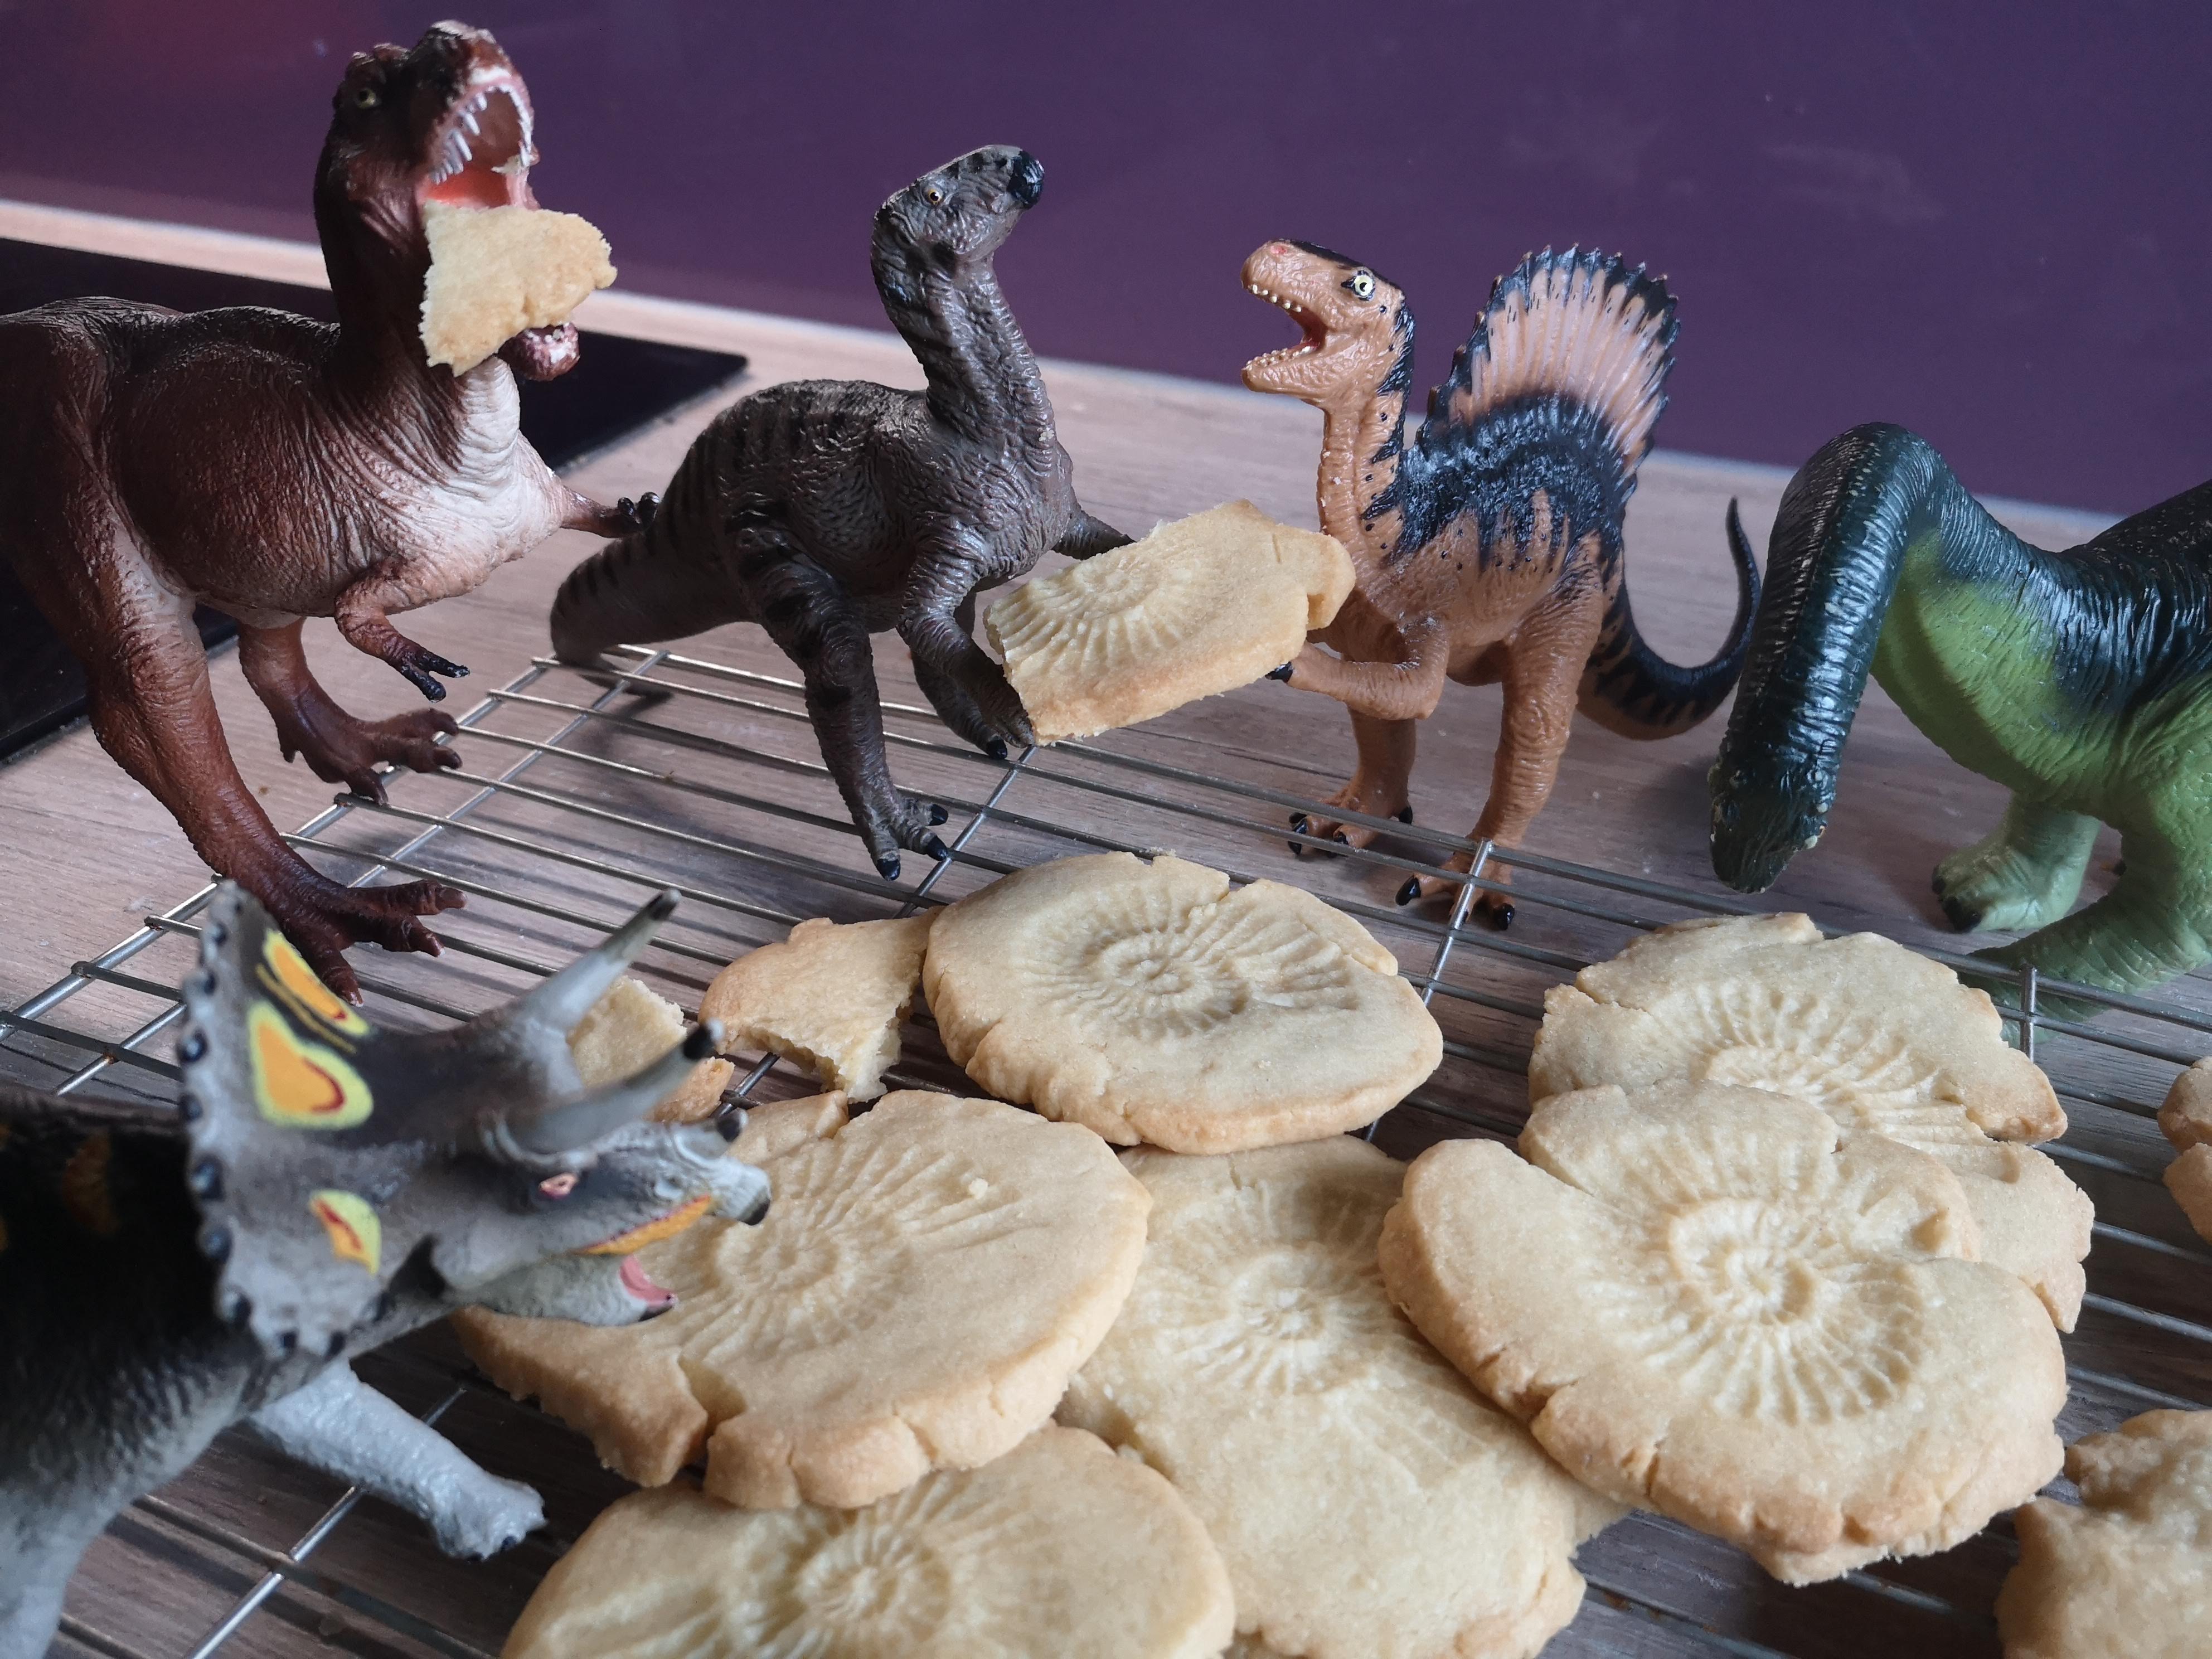 Five plastic dinosaurs around a pile of baked cookies with indented ammonite shapes baked into them. Two dinosaurs at the back are holding a piece of cookie, one has a piece in her mouth.